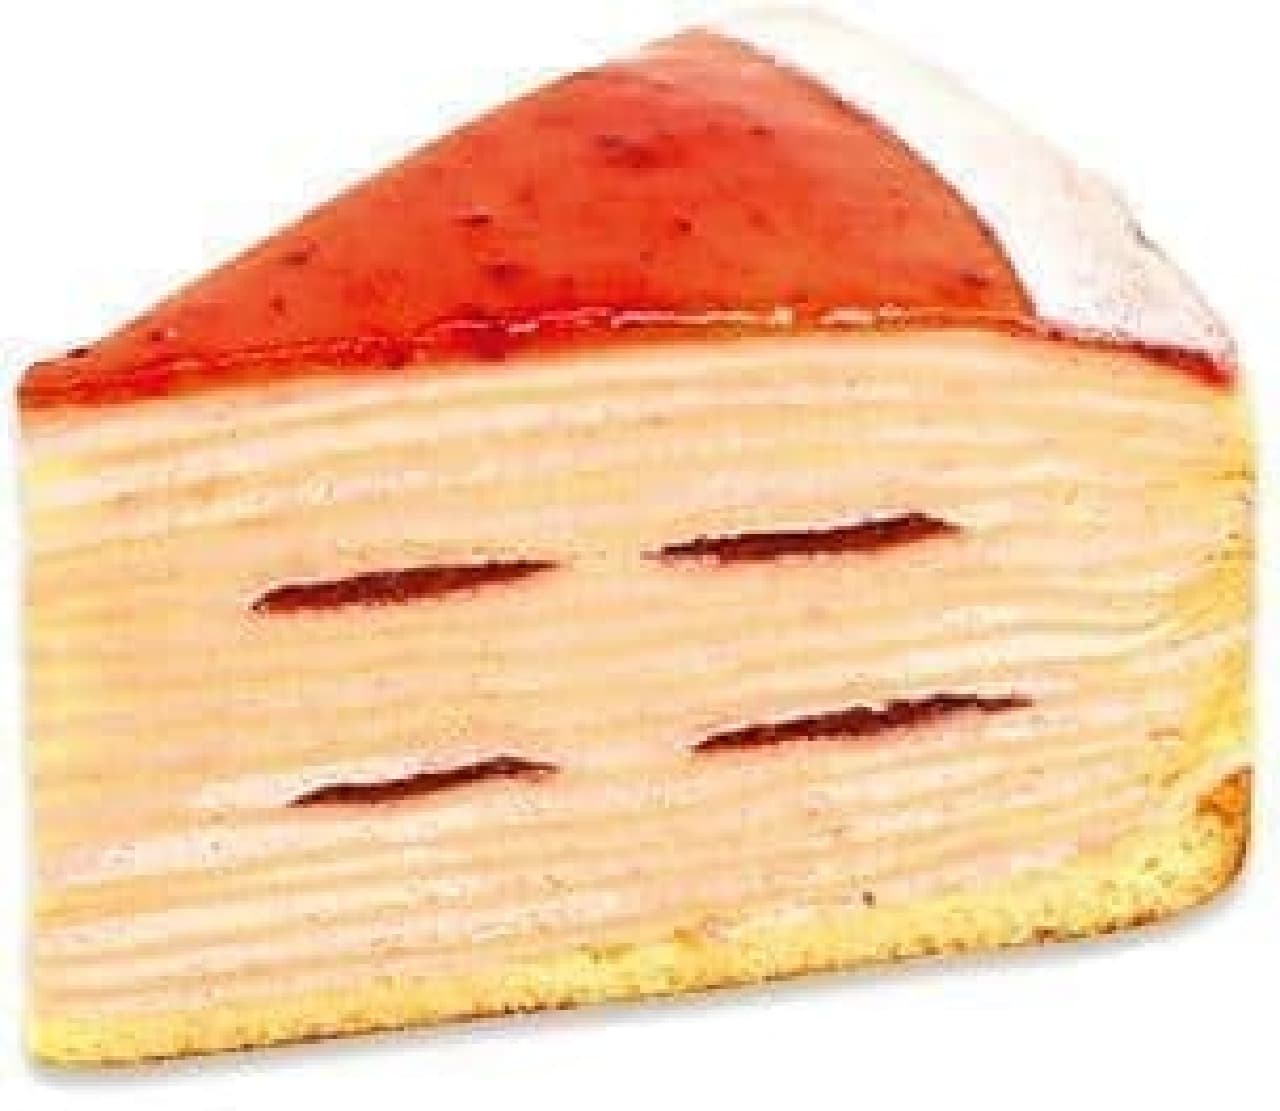 Fujiya pastry shop "Mille crêpes of 3 kinds of strawberries from Tochigi prefecture"